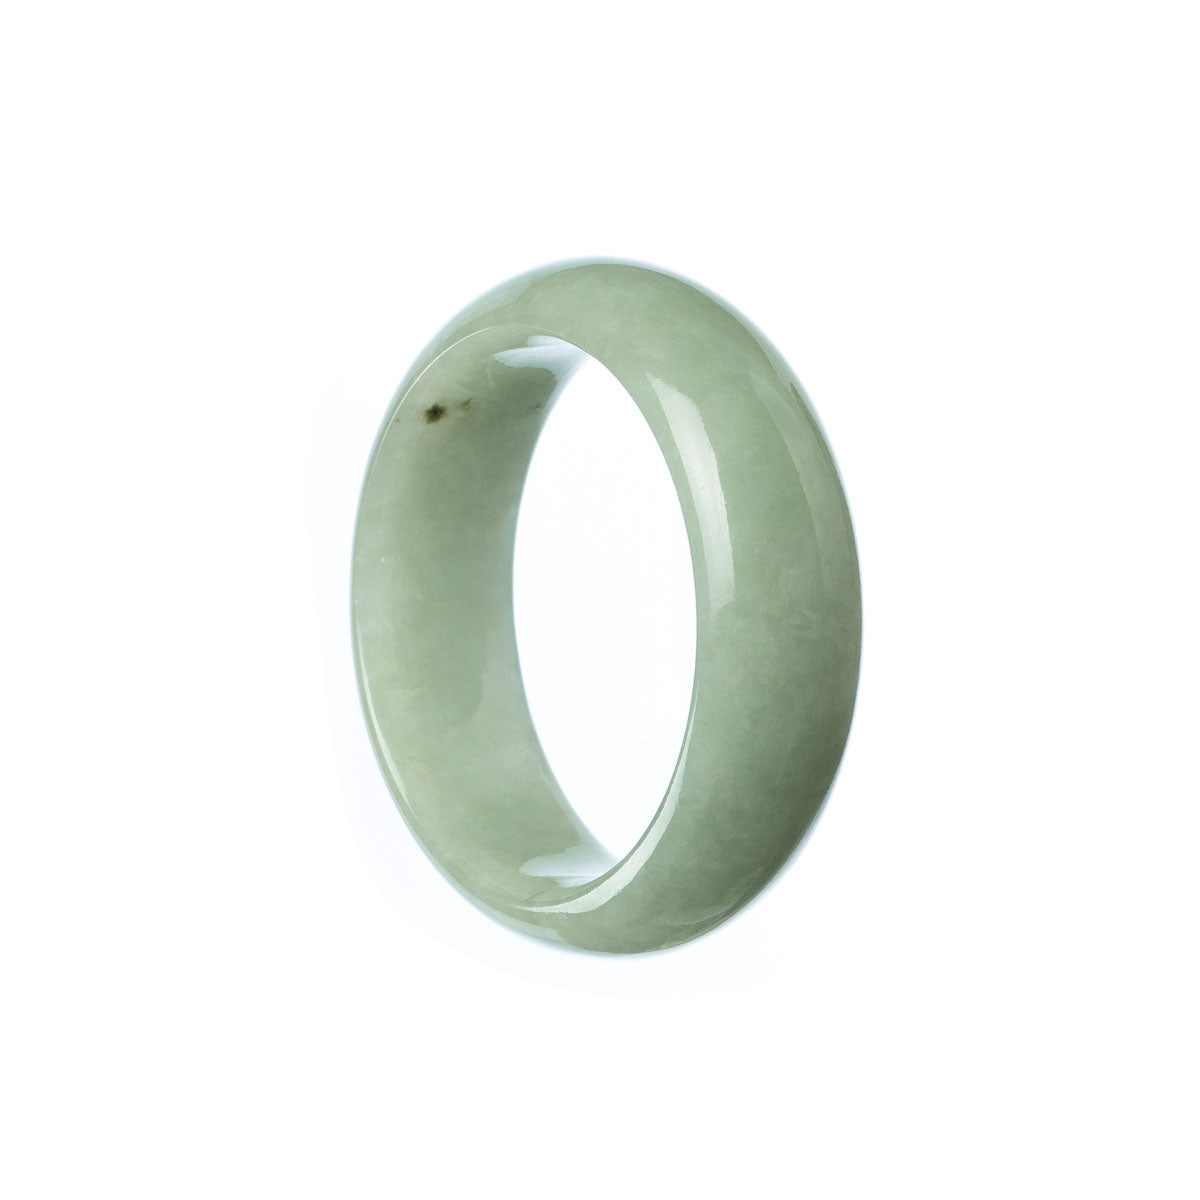 A half moon-shaped green jade bracelet for children, crafted with authentic Grade A traditional jade. Perfect for adding a touch of elegance to any outfit.